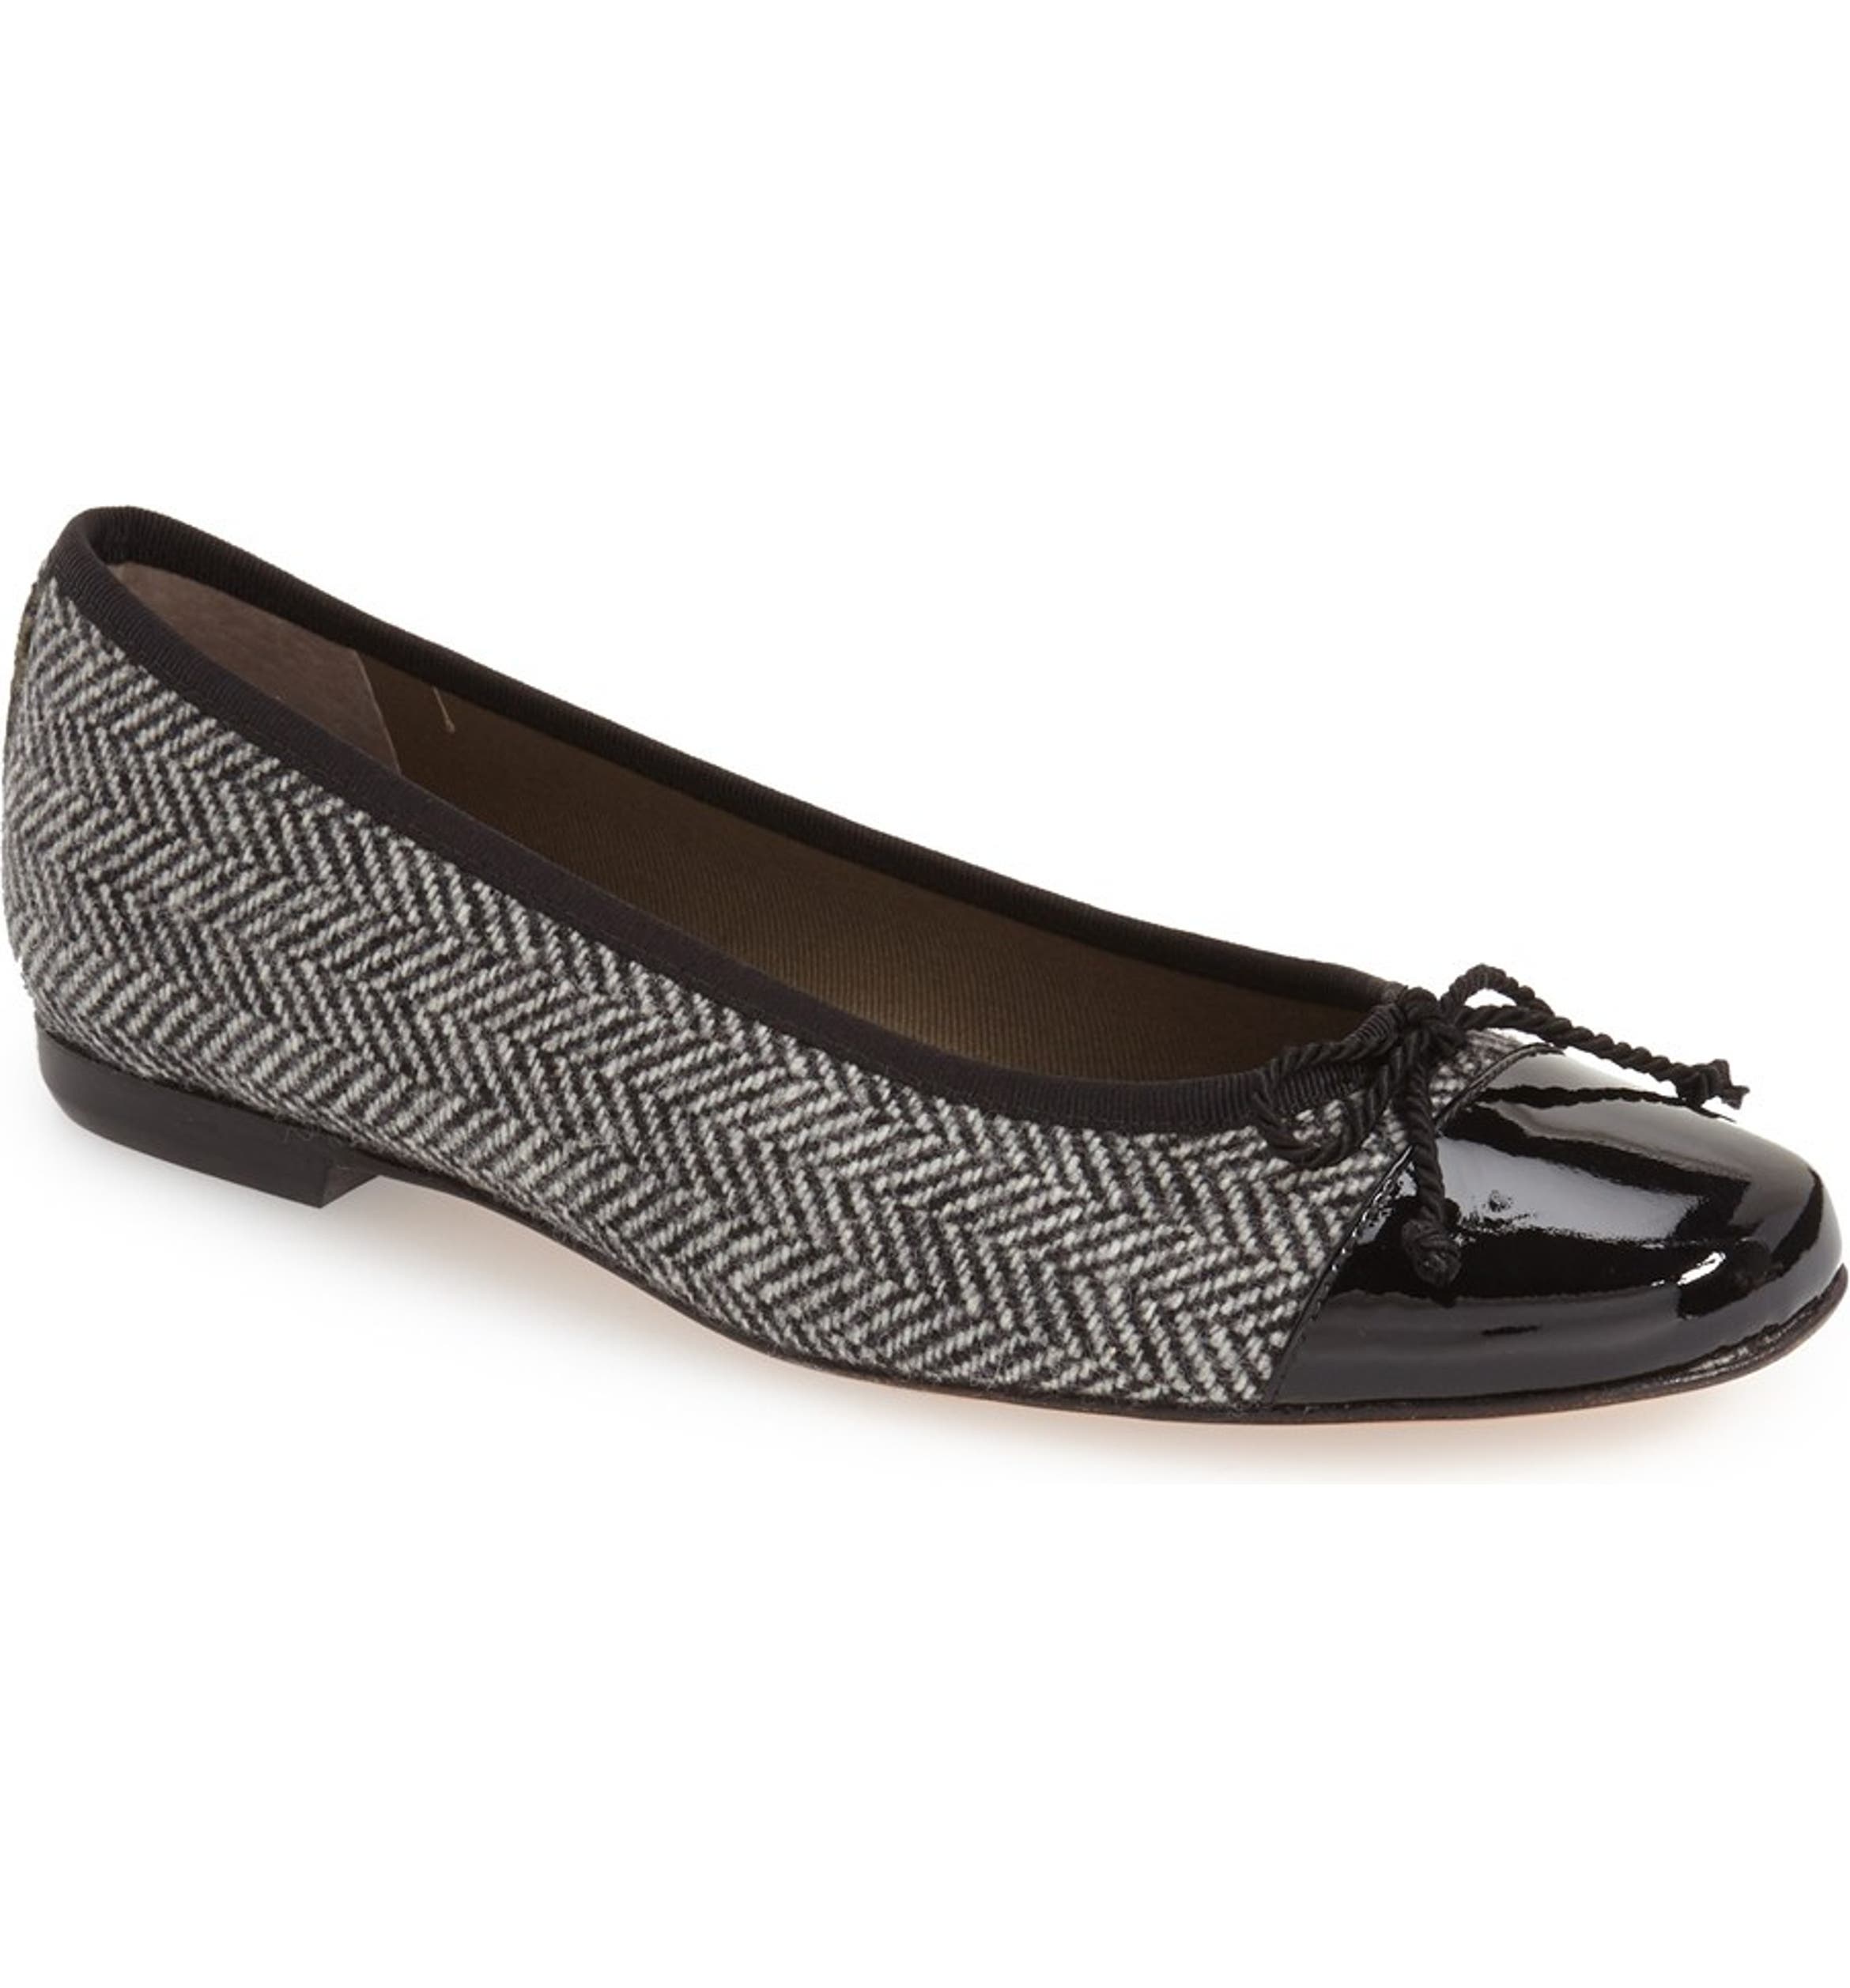 French Sole 'Grand' Ballet Flat | Nordstrom